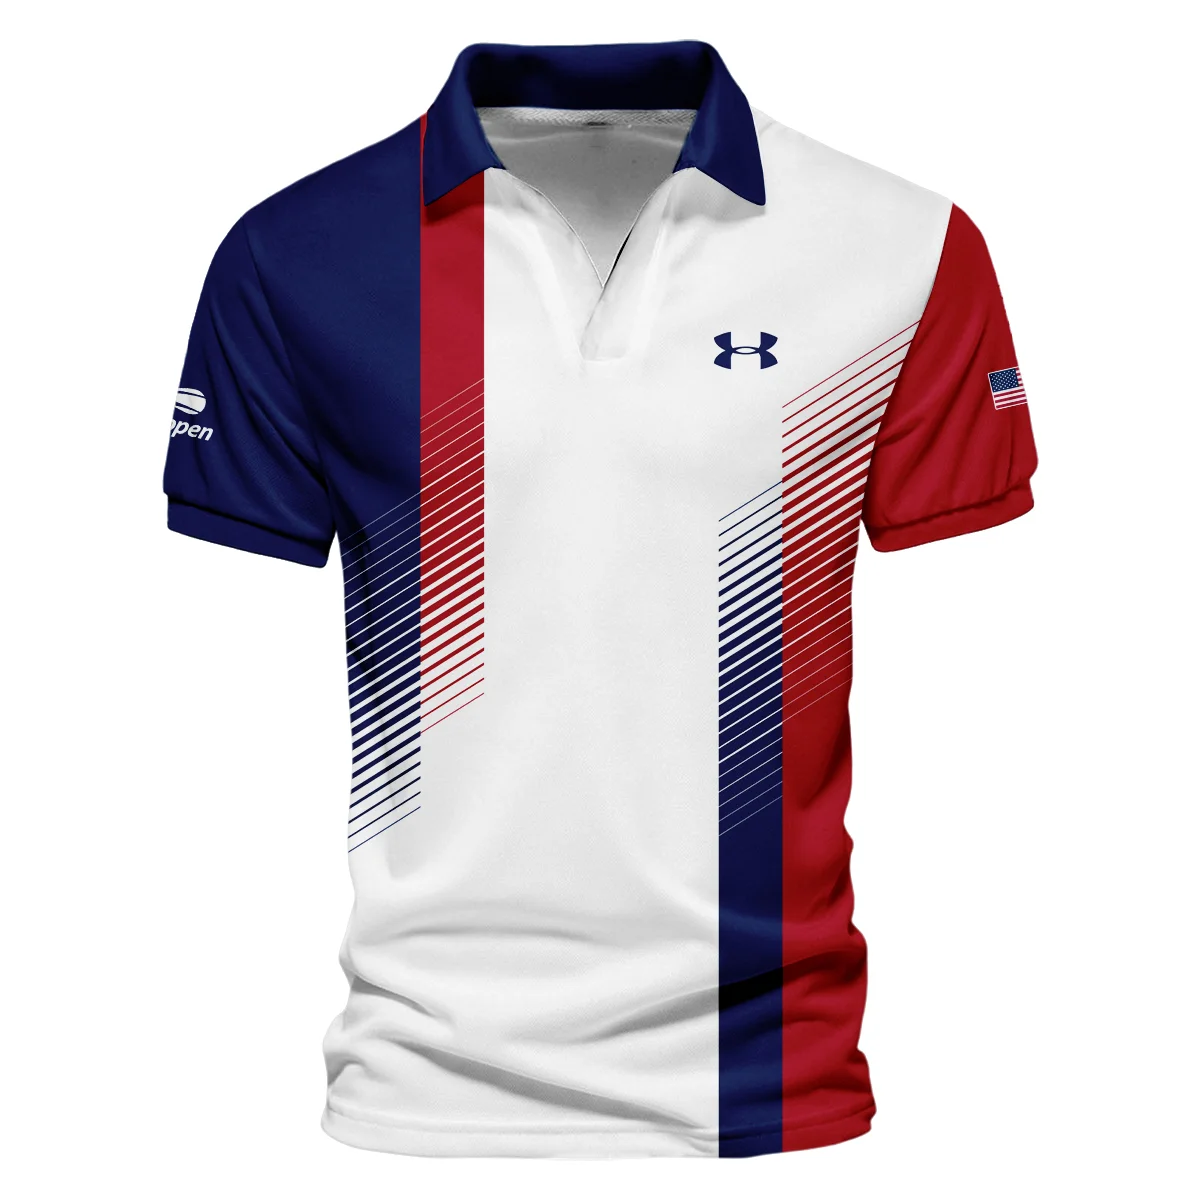 Under Armour Blue Red Straight Line White US Open Tennis Champions Unisex T-Shirt Style Classic T-Shirt